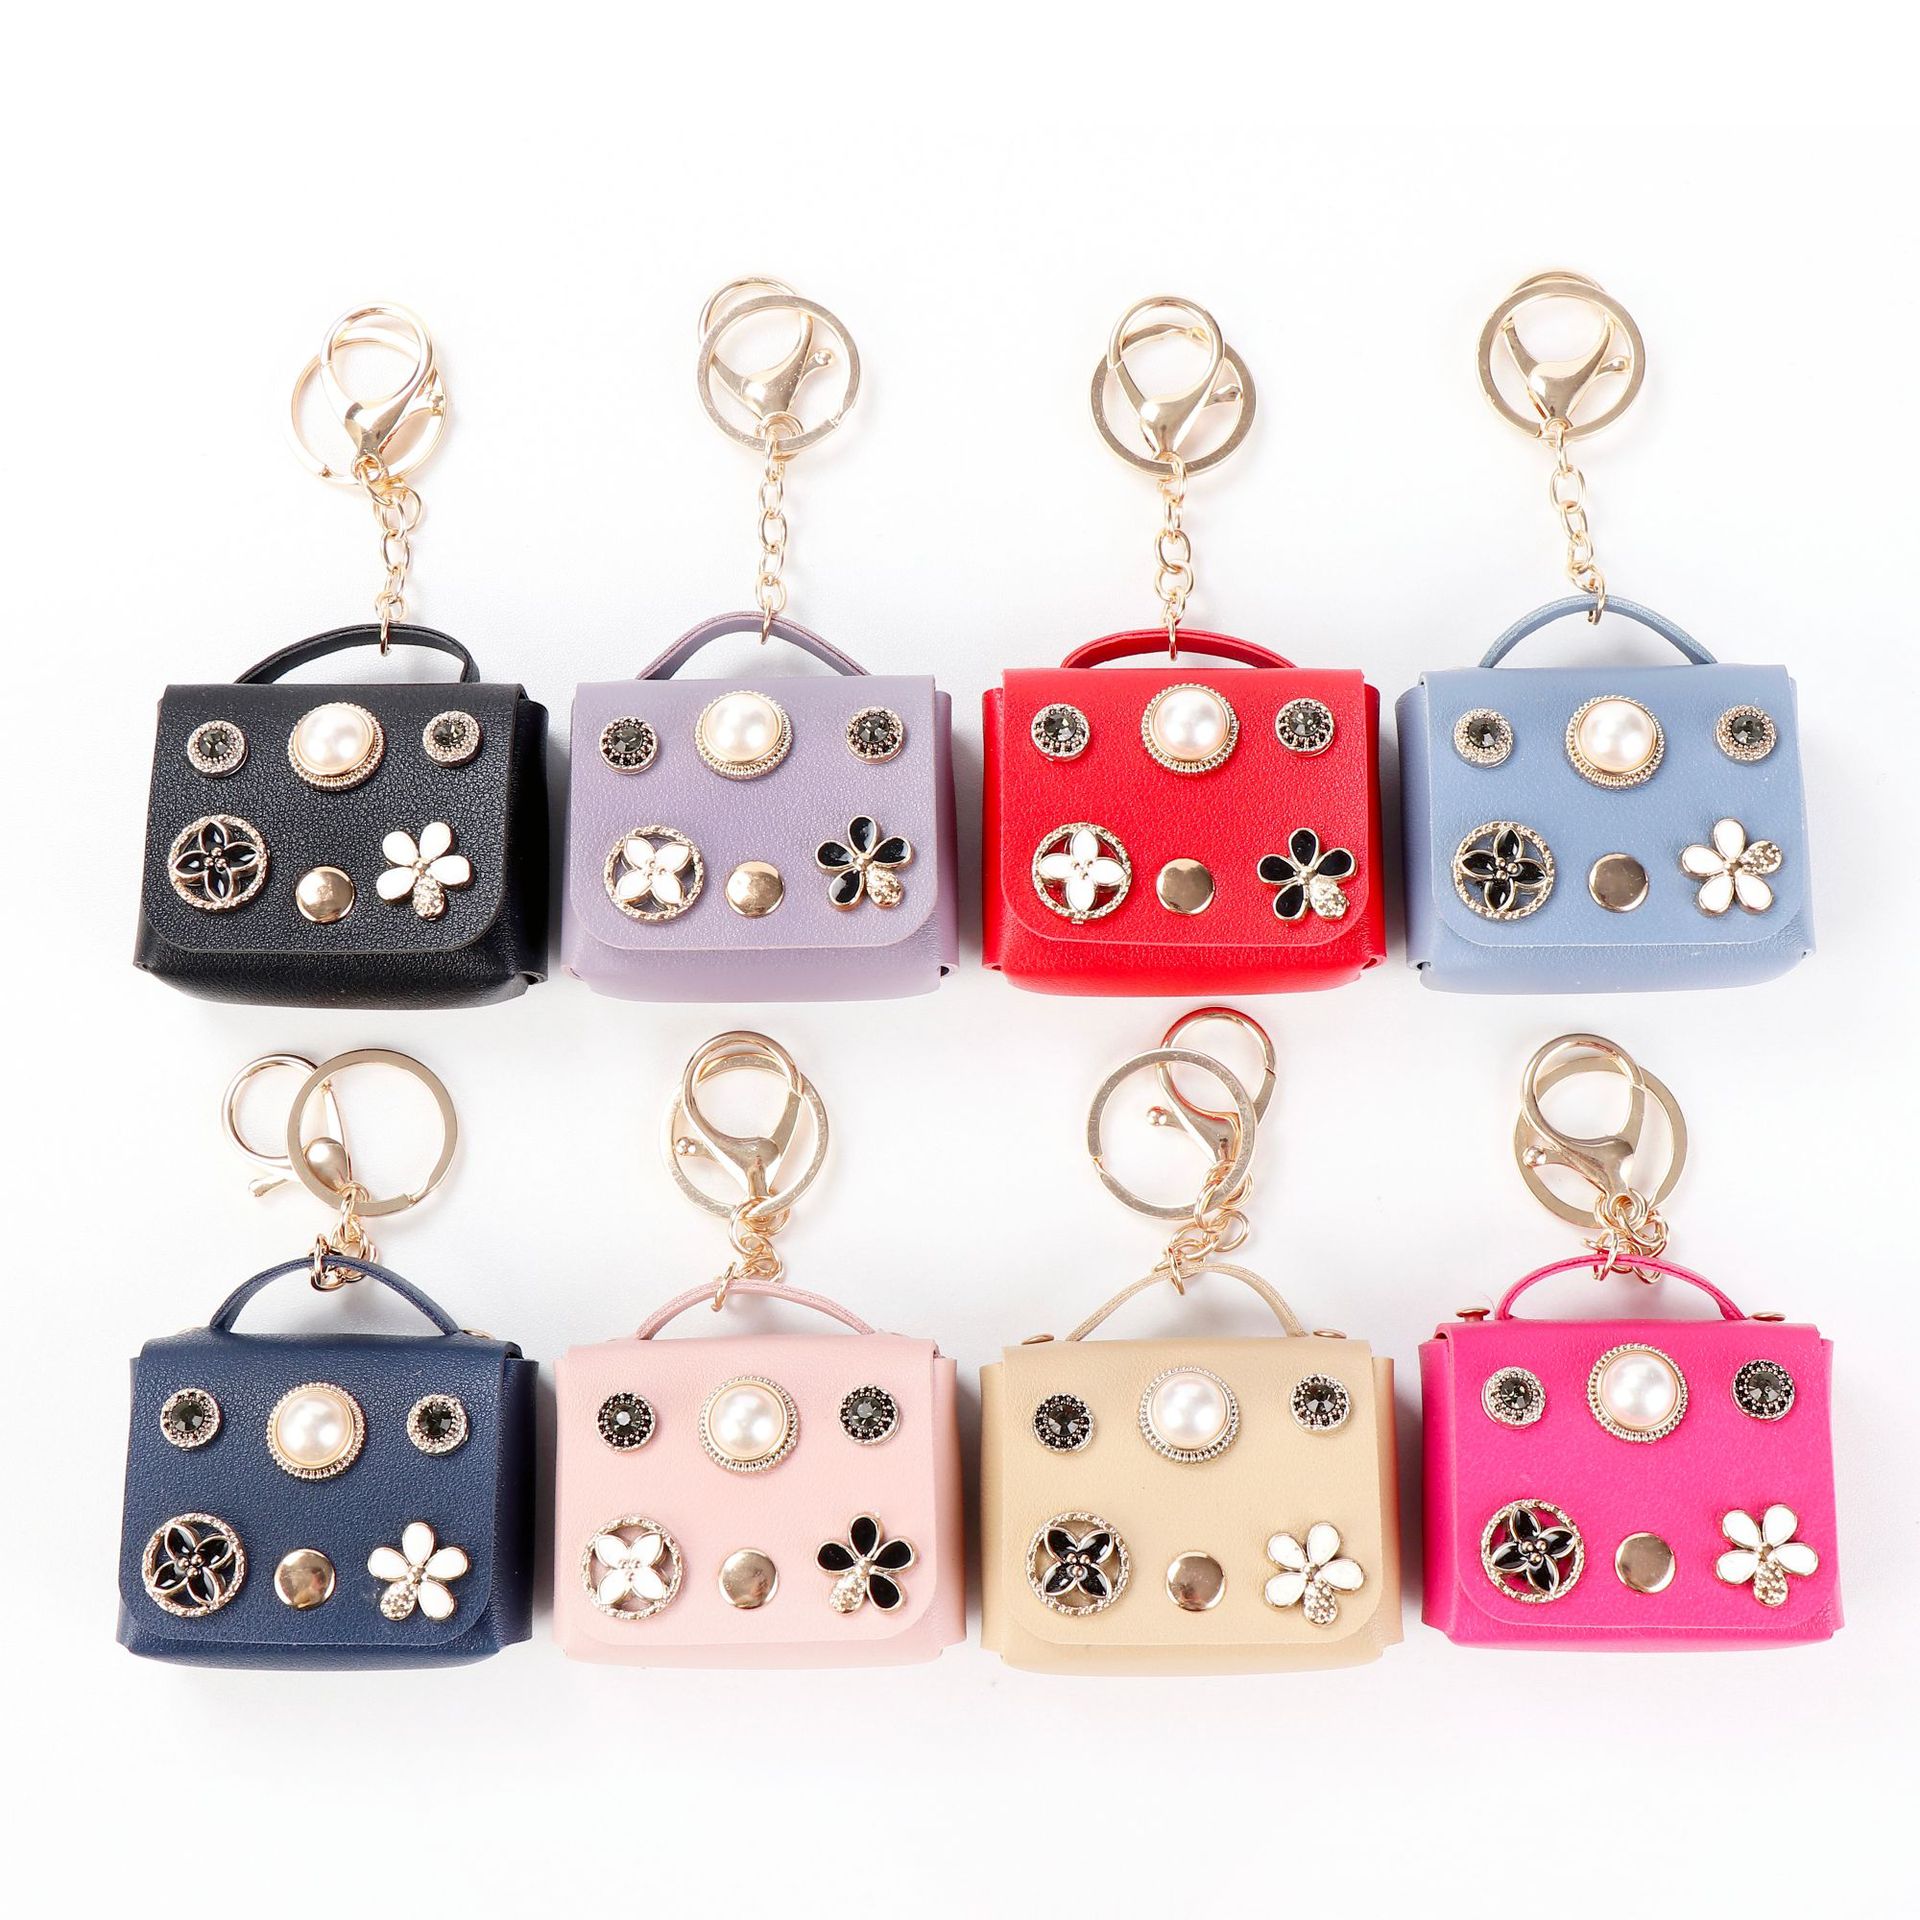 Factory in Stock Korean Version of Chanel's Style Mini Bag Headset Storage Bag Coin Purse Creative Bag Keychain Pendant